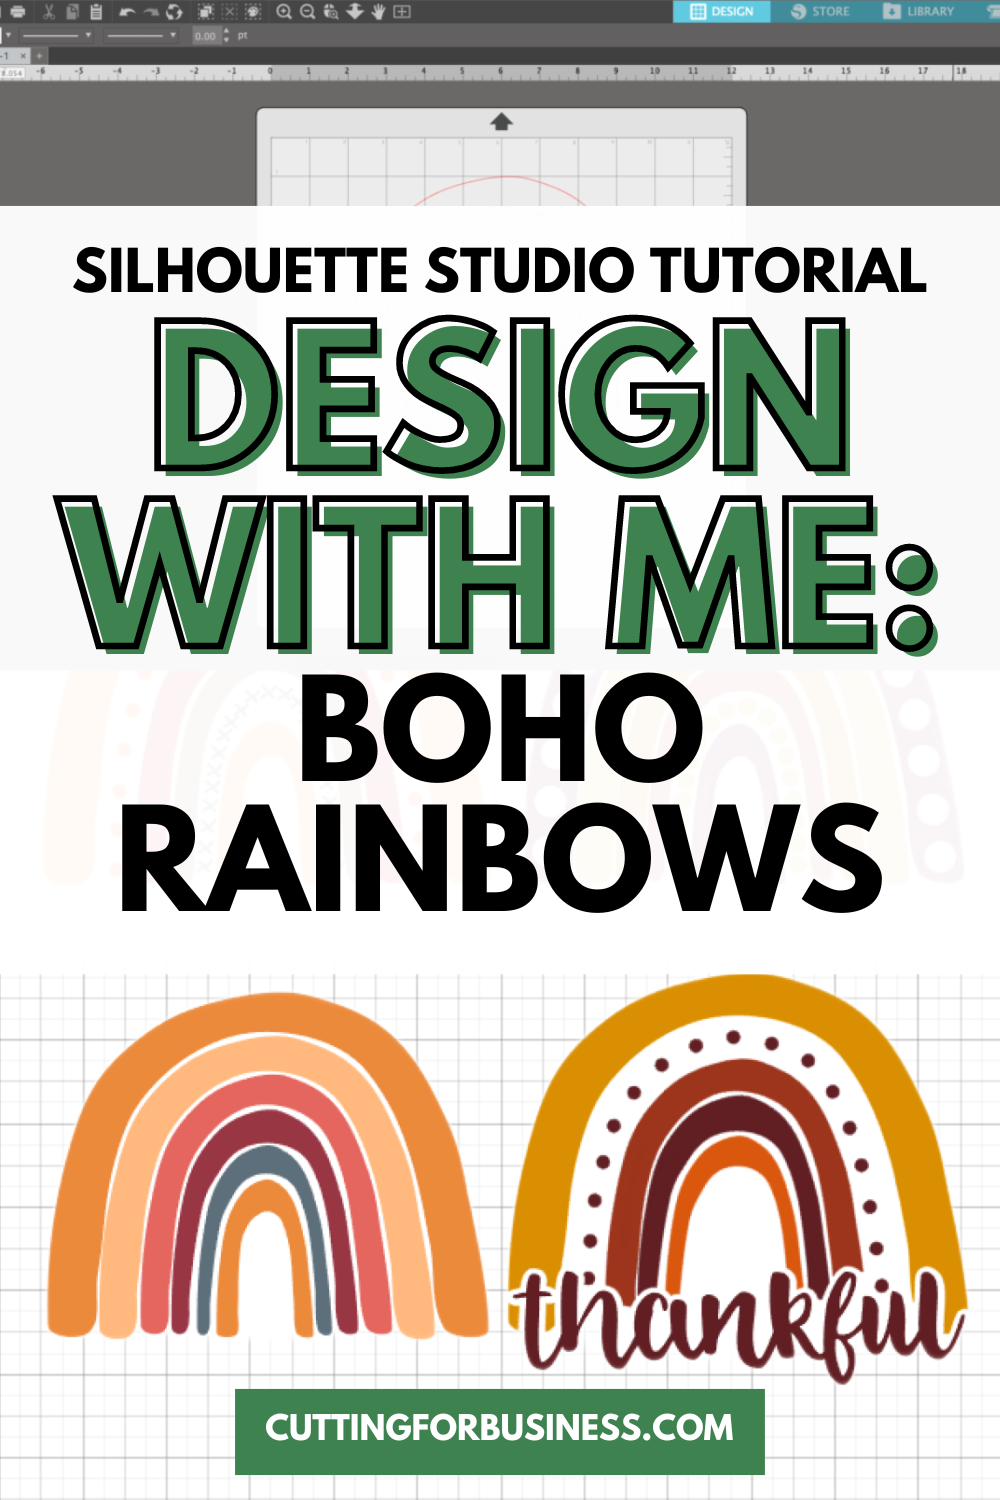 Step-by-step tutorial to create abstract boho rainbow SVG files in Silhouette Studio - cuttingforbusiness.com.